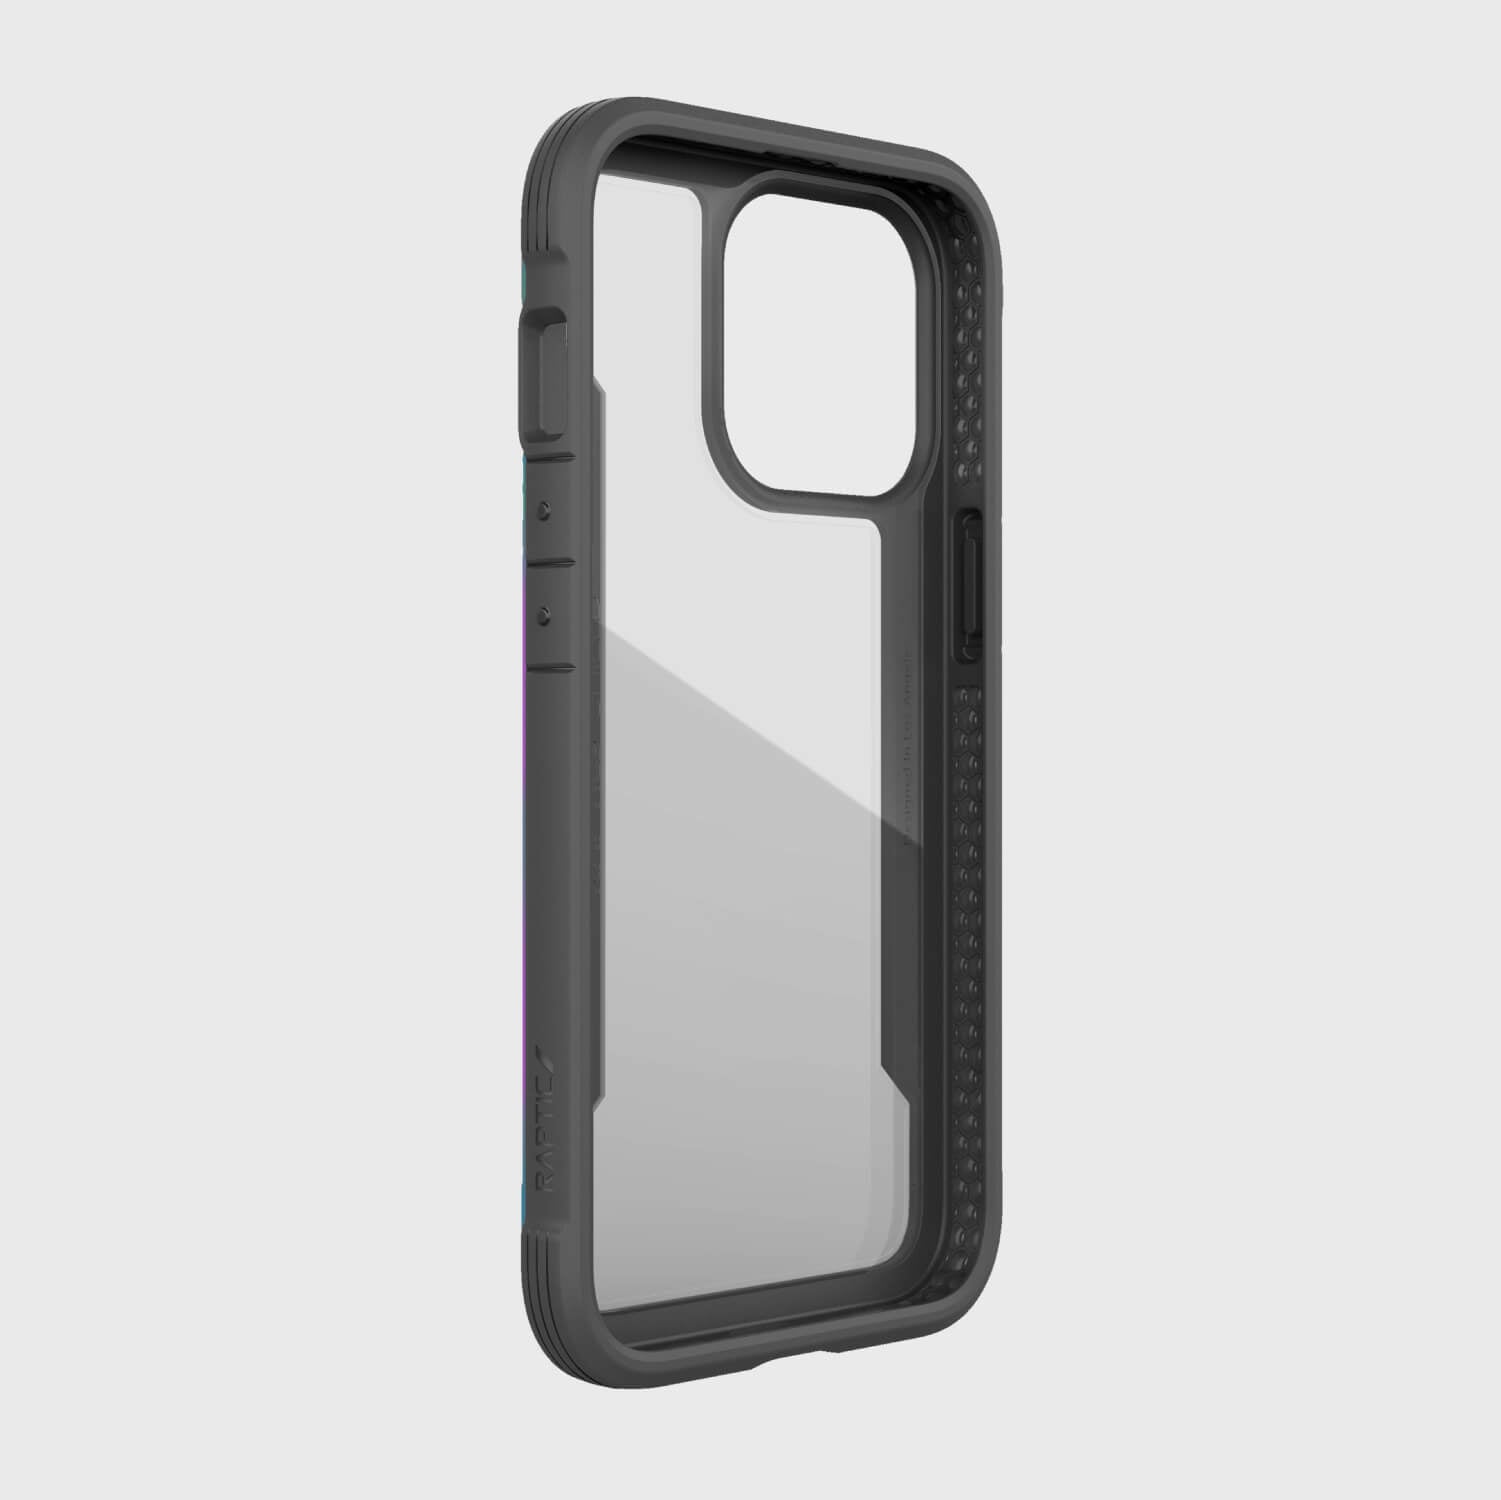 Raptic SHIELD PRO iPhone 13 Pro case providing Raptic Shield Pro with 13 foot drop protection.